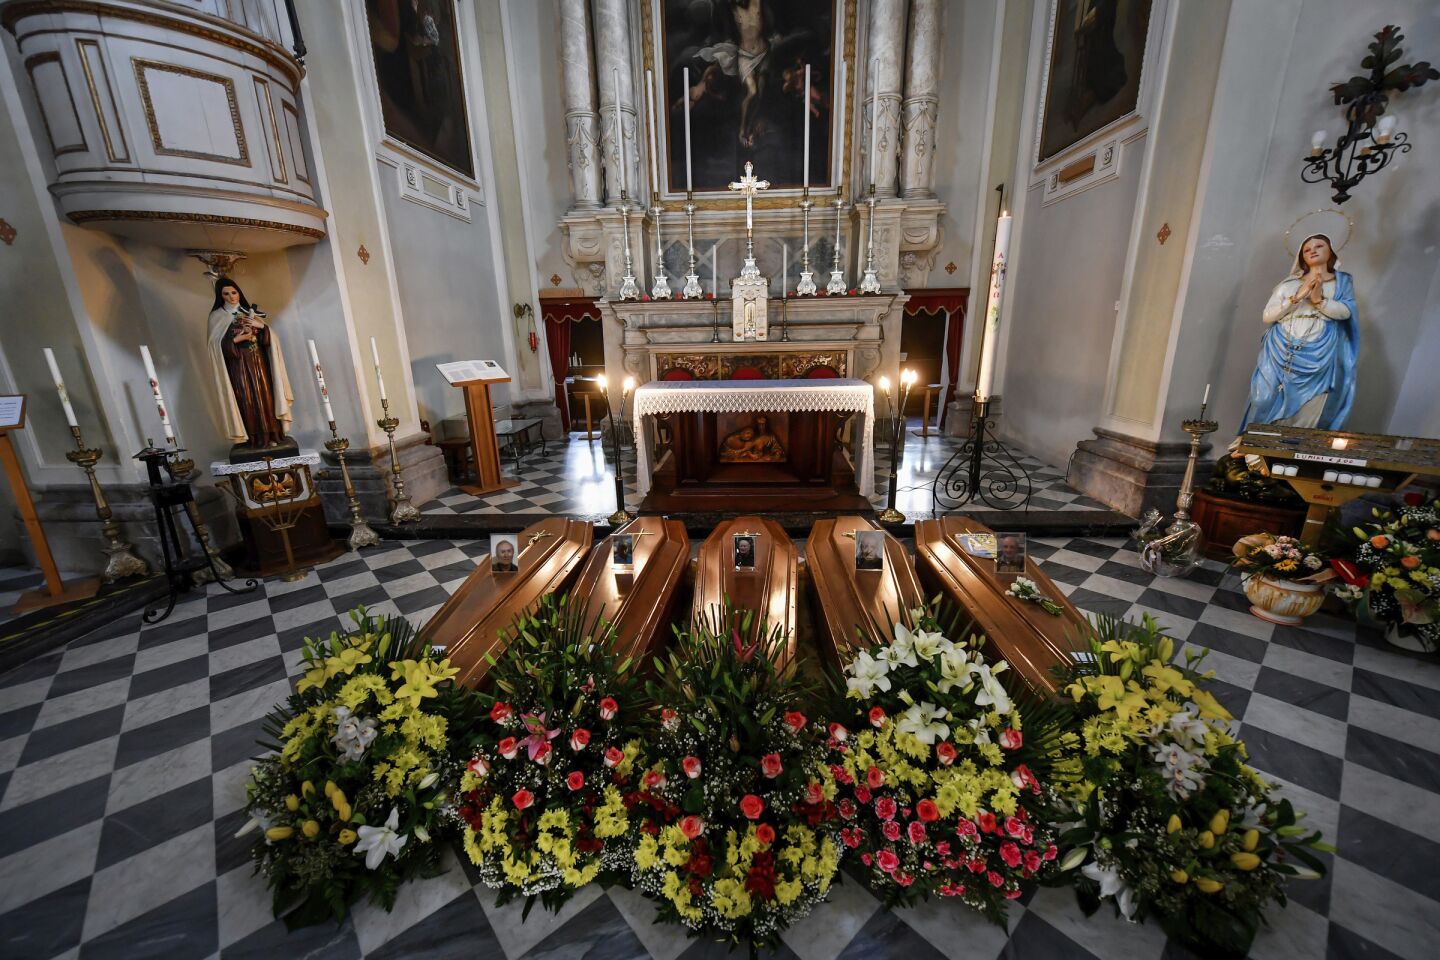 Italy: Coffins wait to be transported to a cemetery in a church in northern Italy.